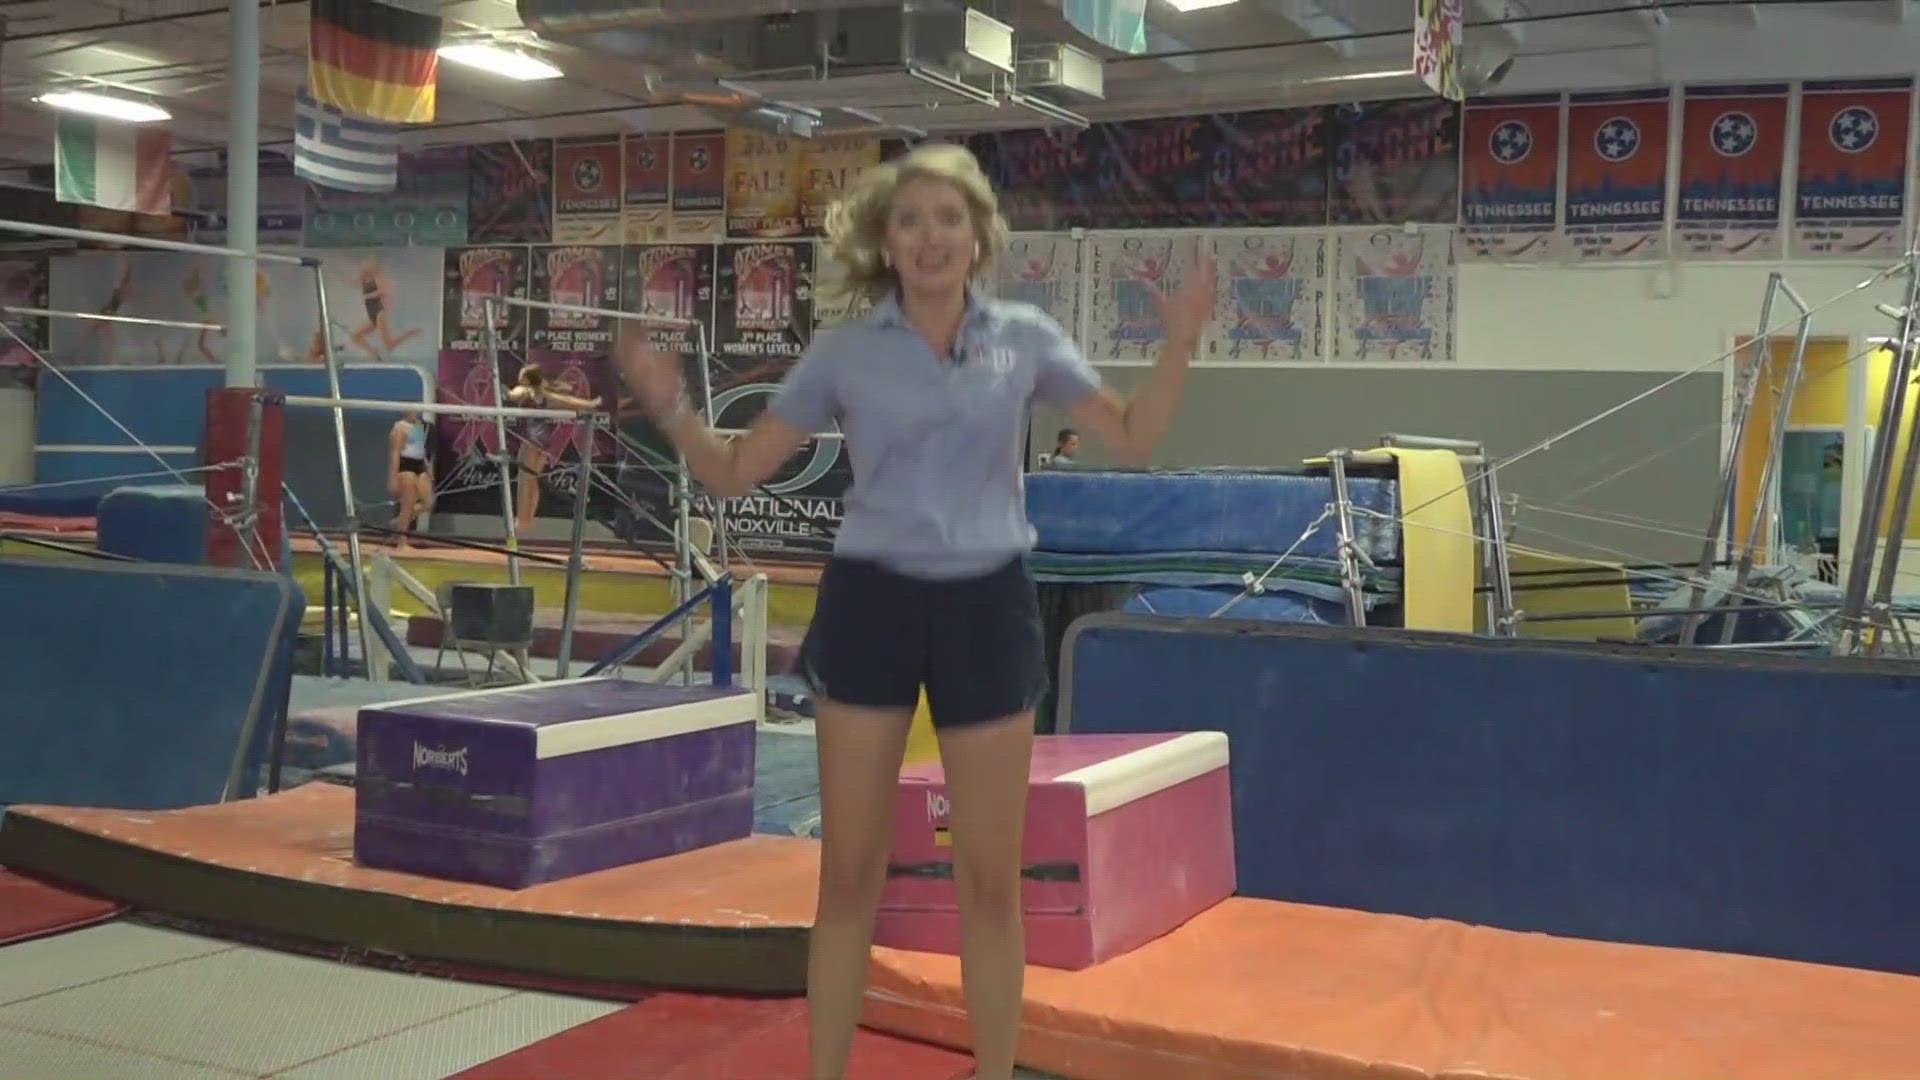 Katie's showing us her jumping skills for the Paris Olympics at Premier Athletics.